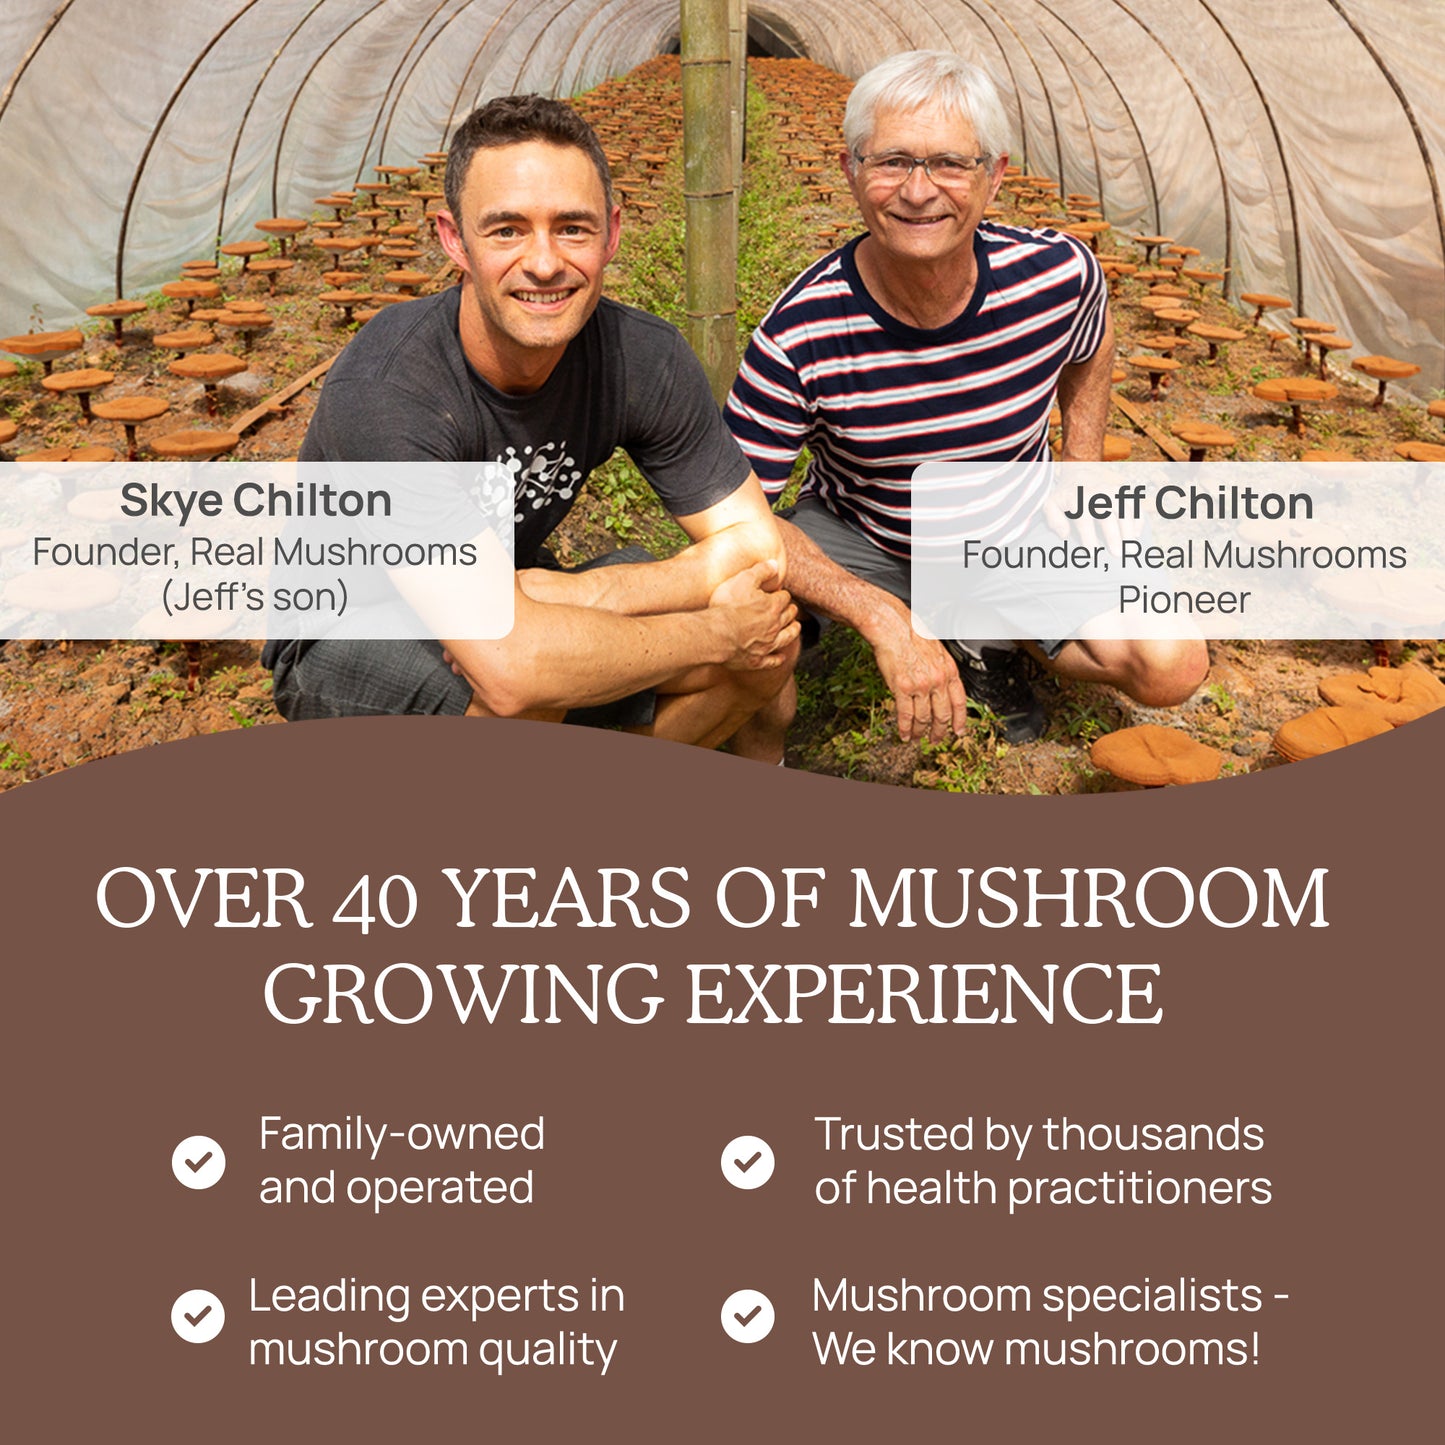 Two men smiling inside an organic mushroom cultivation greenhouse, representing Real Mushrooms, a family business with over 40 years of experience in growing and selling Mushroom Chocolate 5 Packs.